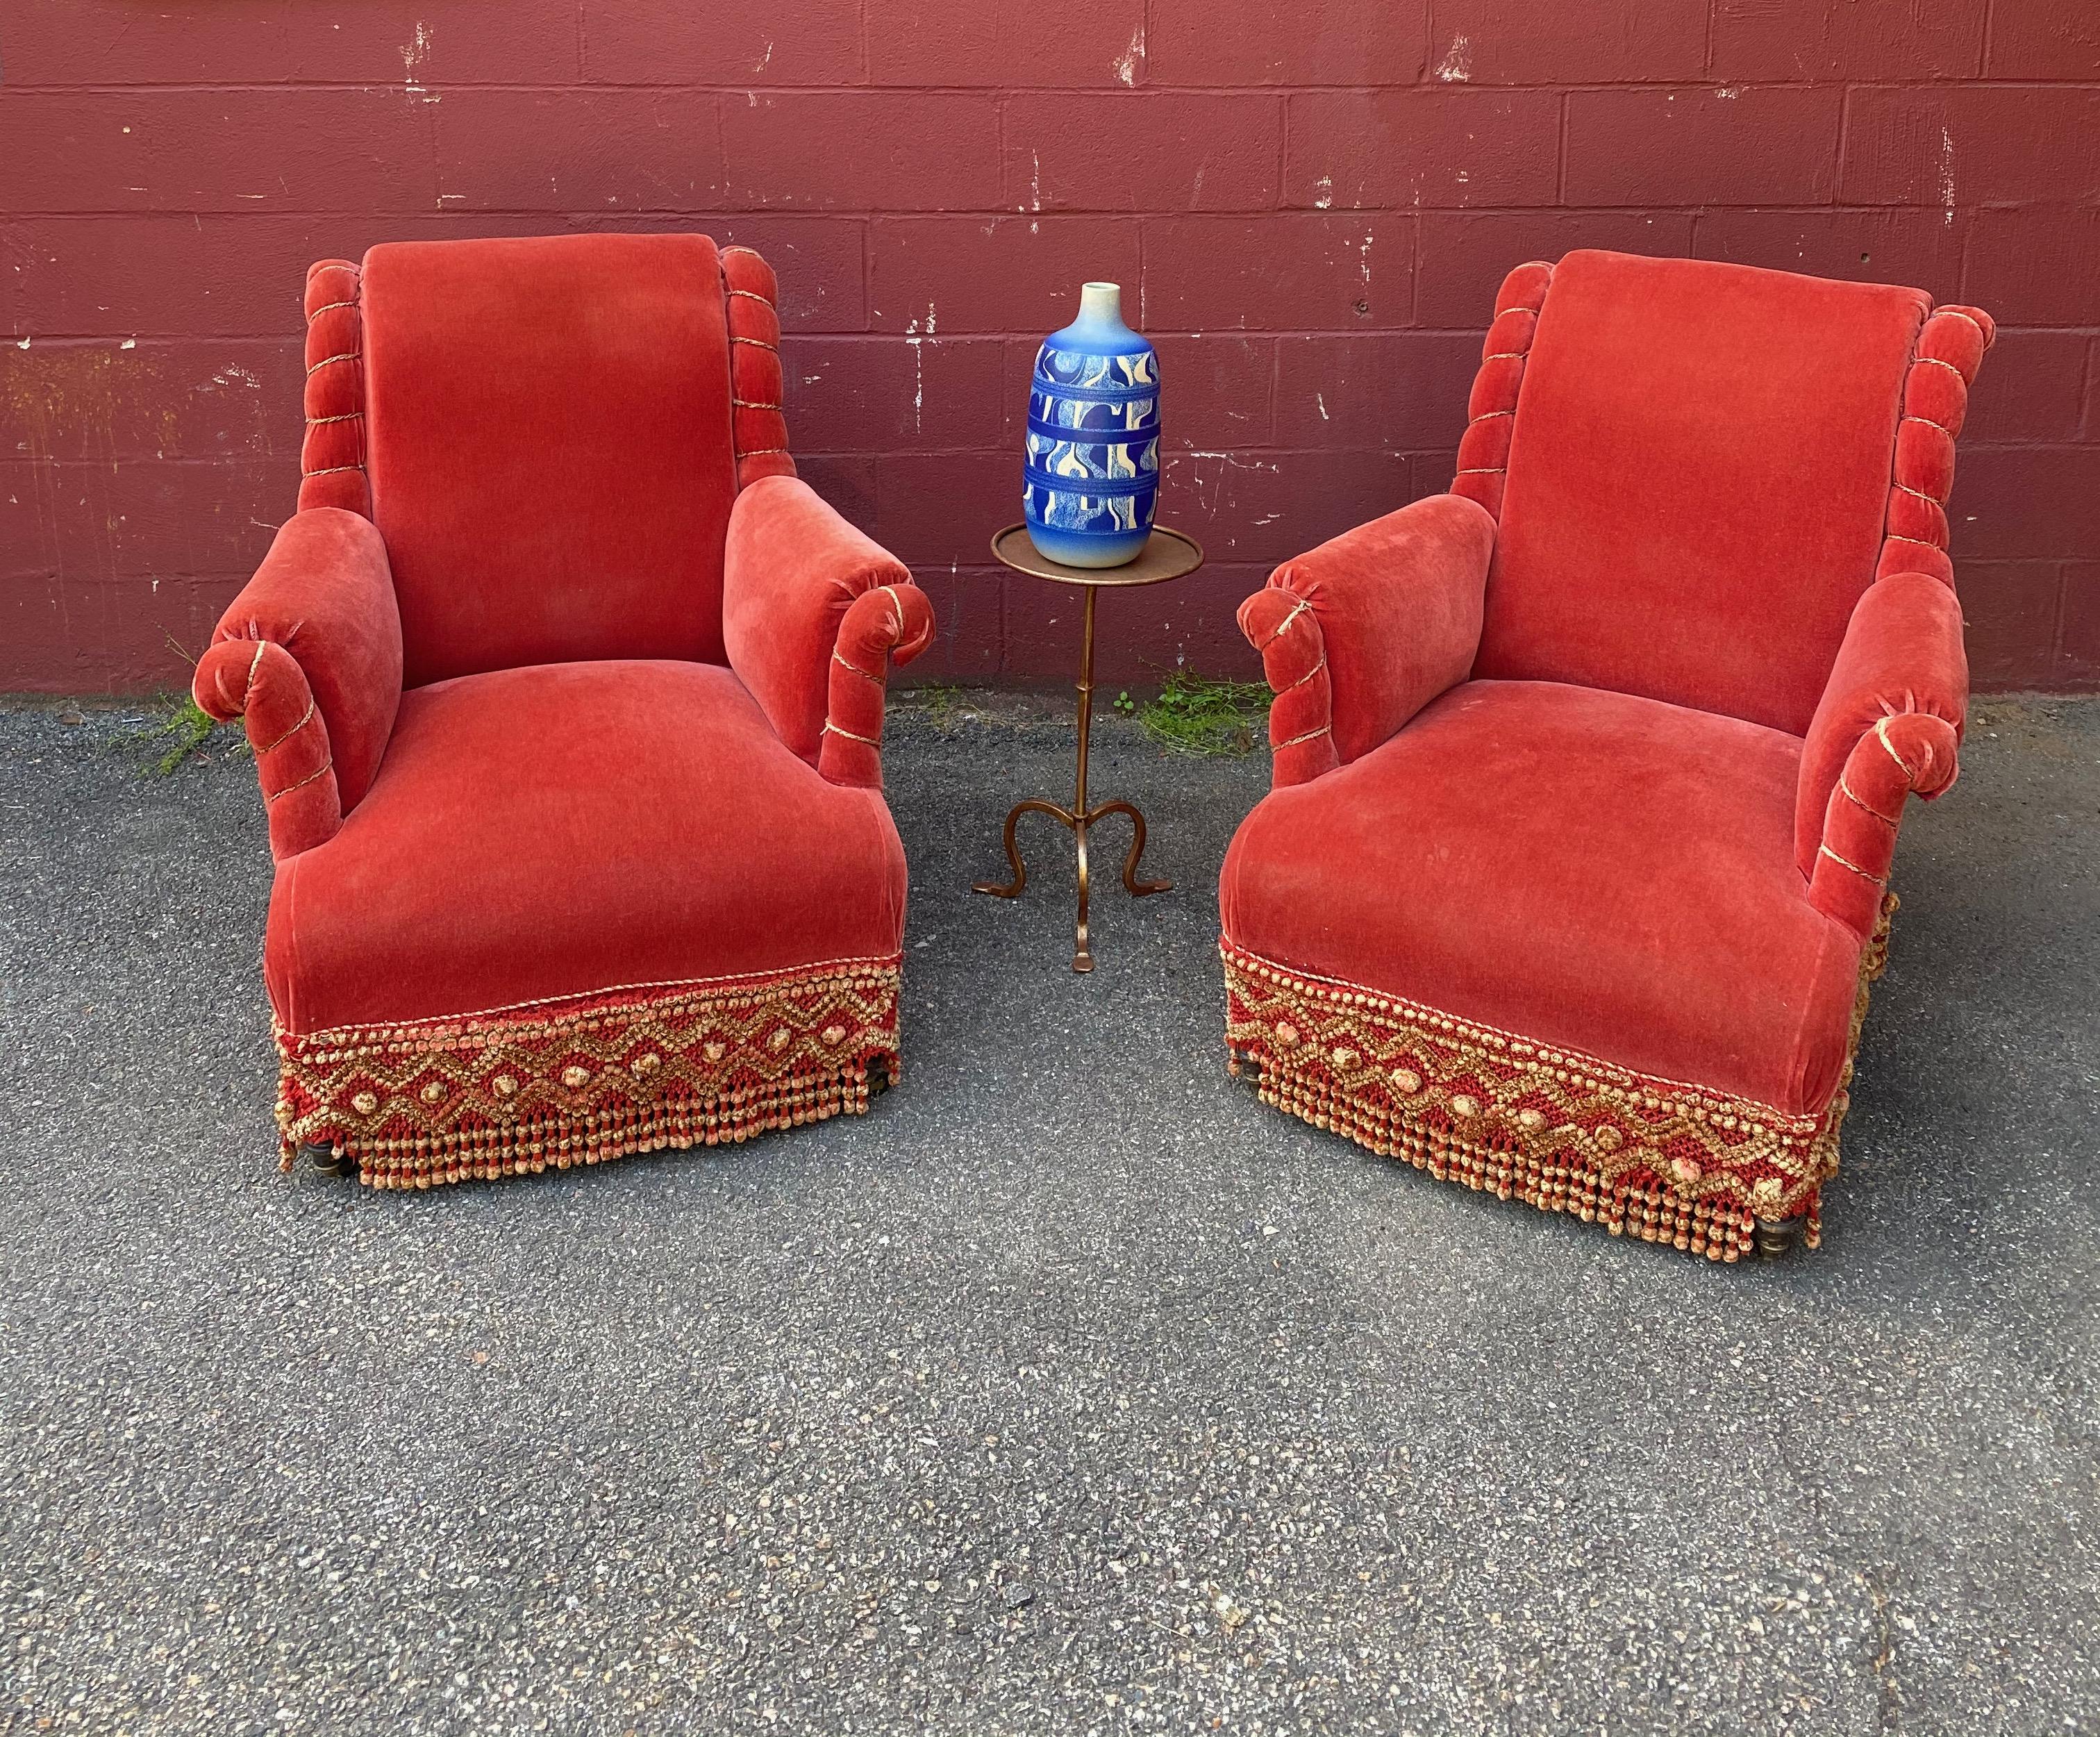 An elaborately upholstered pair of French armchairs with scrolled backs. The vintage fabric is a rich orange / persimmon velvet that is accented by a braided rope along the arms and sides and is trimmed in a braided and tasseled fringe. The fabric